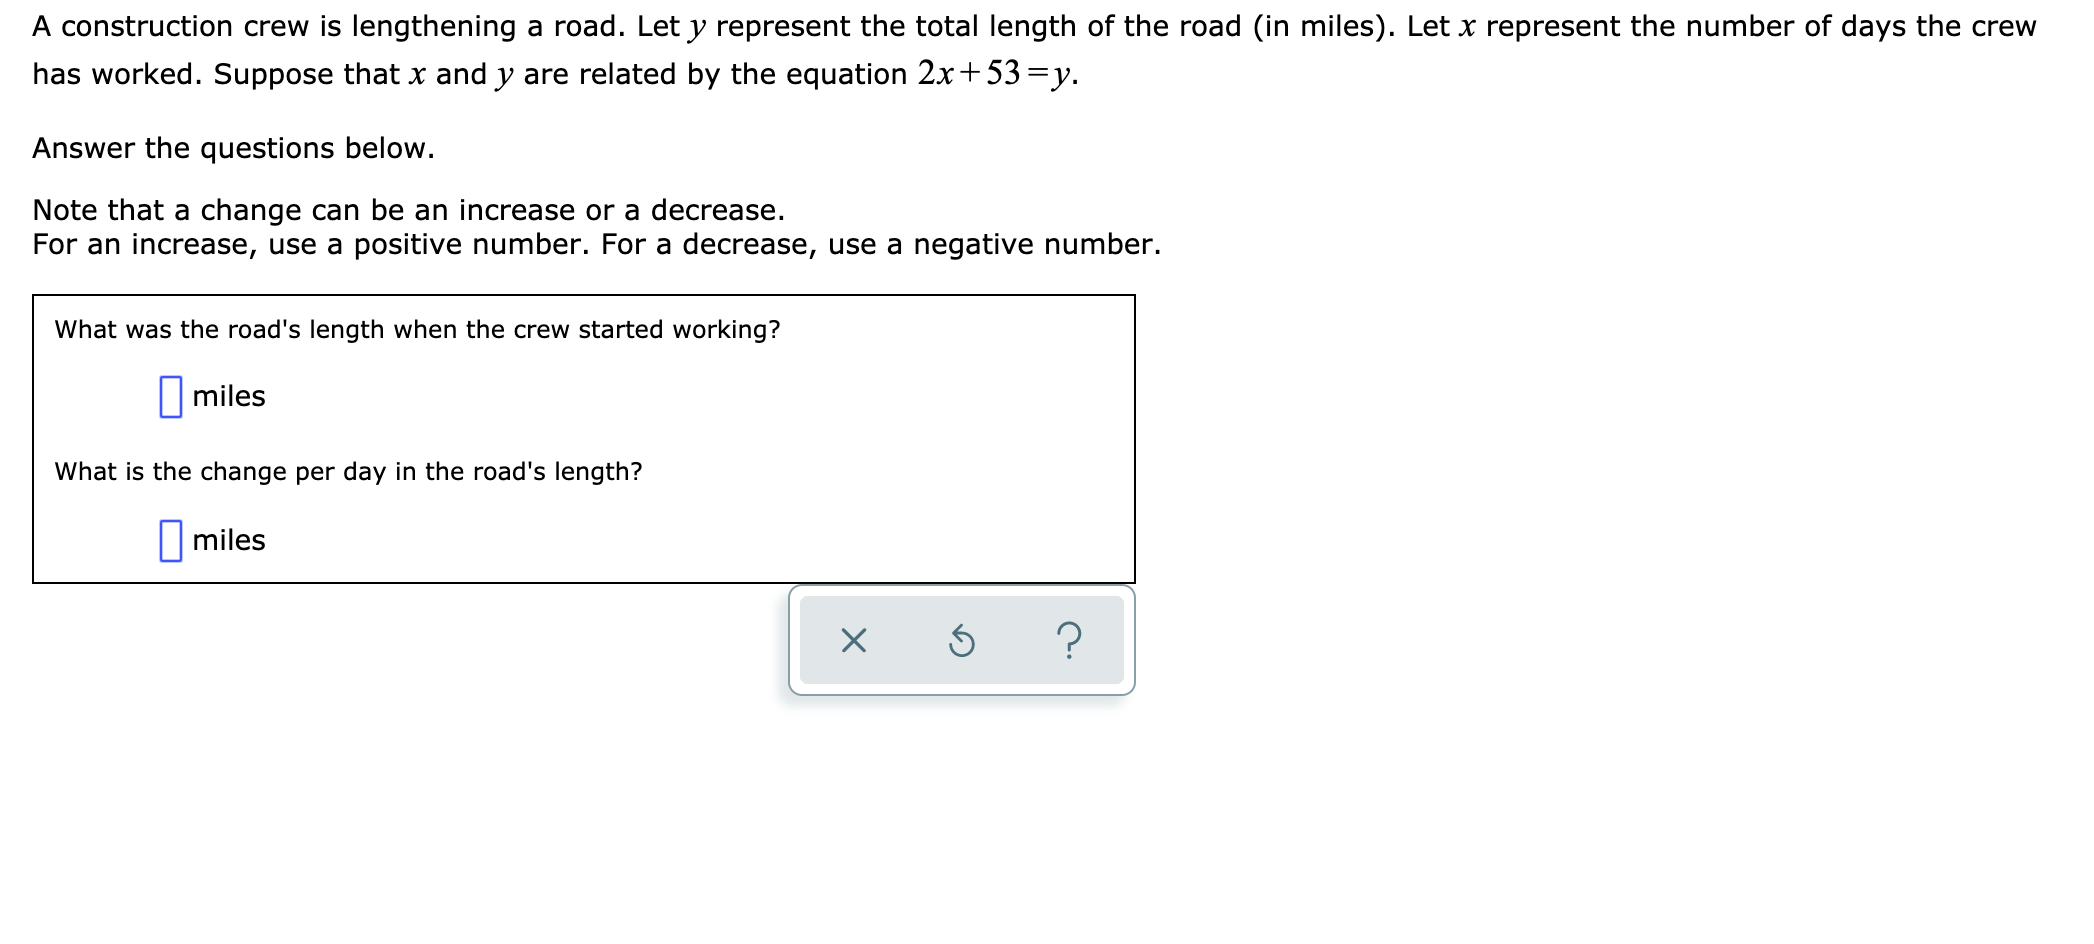 A construction crew is lengthening
a road. Let y represent the total length of the road (in miles). Let x represent the number of days the crew
has worked. Suppose that x and y are related by the equation 2x
53 y
Answer the questions below
Note that a change can be an increase or a decrease.
For an increase, use a positive number. For a decrease, use a negative number.
What was thee road's length when the crew started working?
|miles
What is the change per day in the road's length?
miles
X
